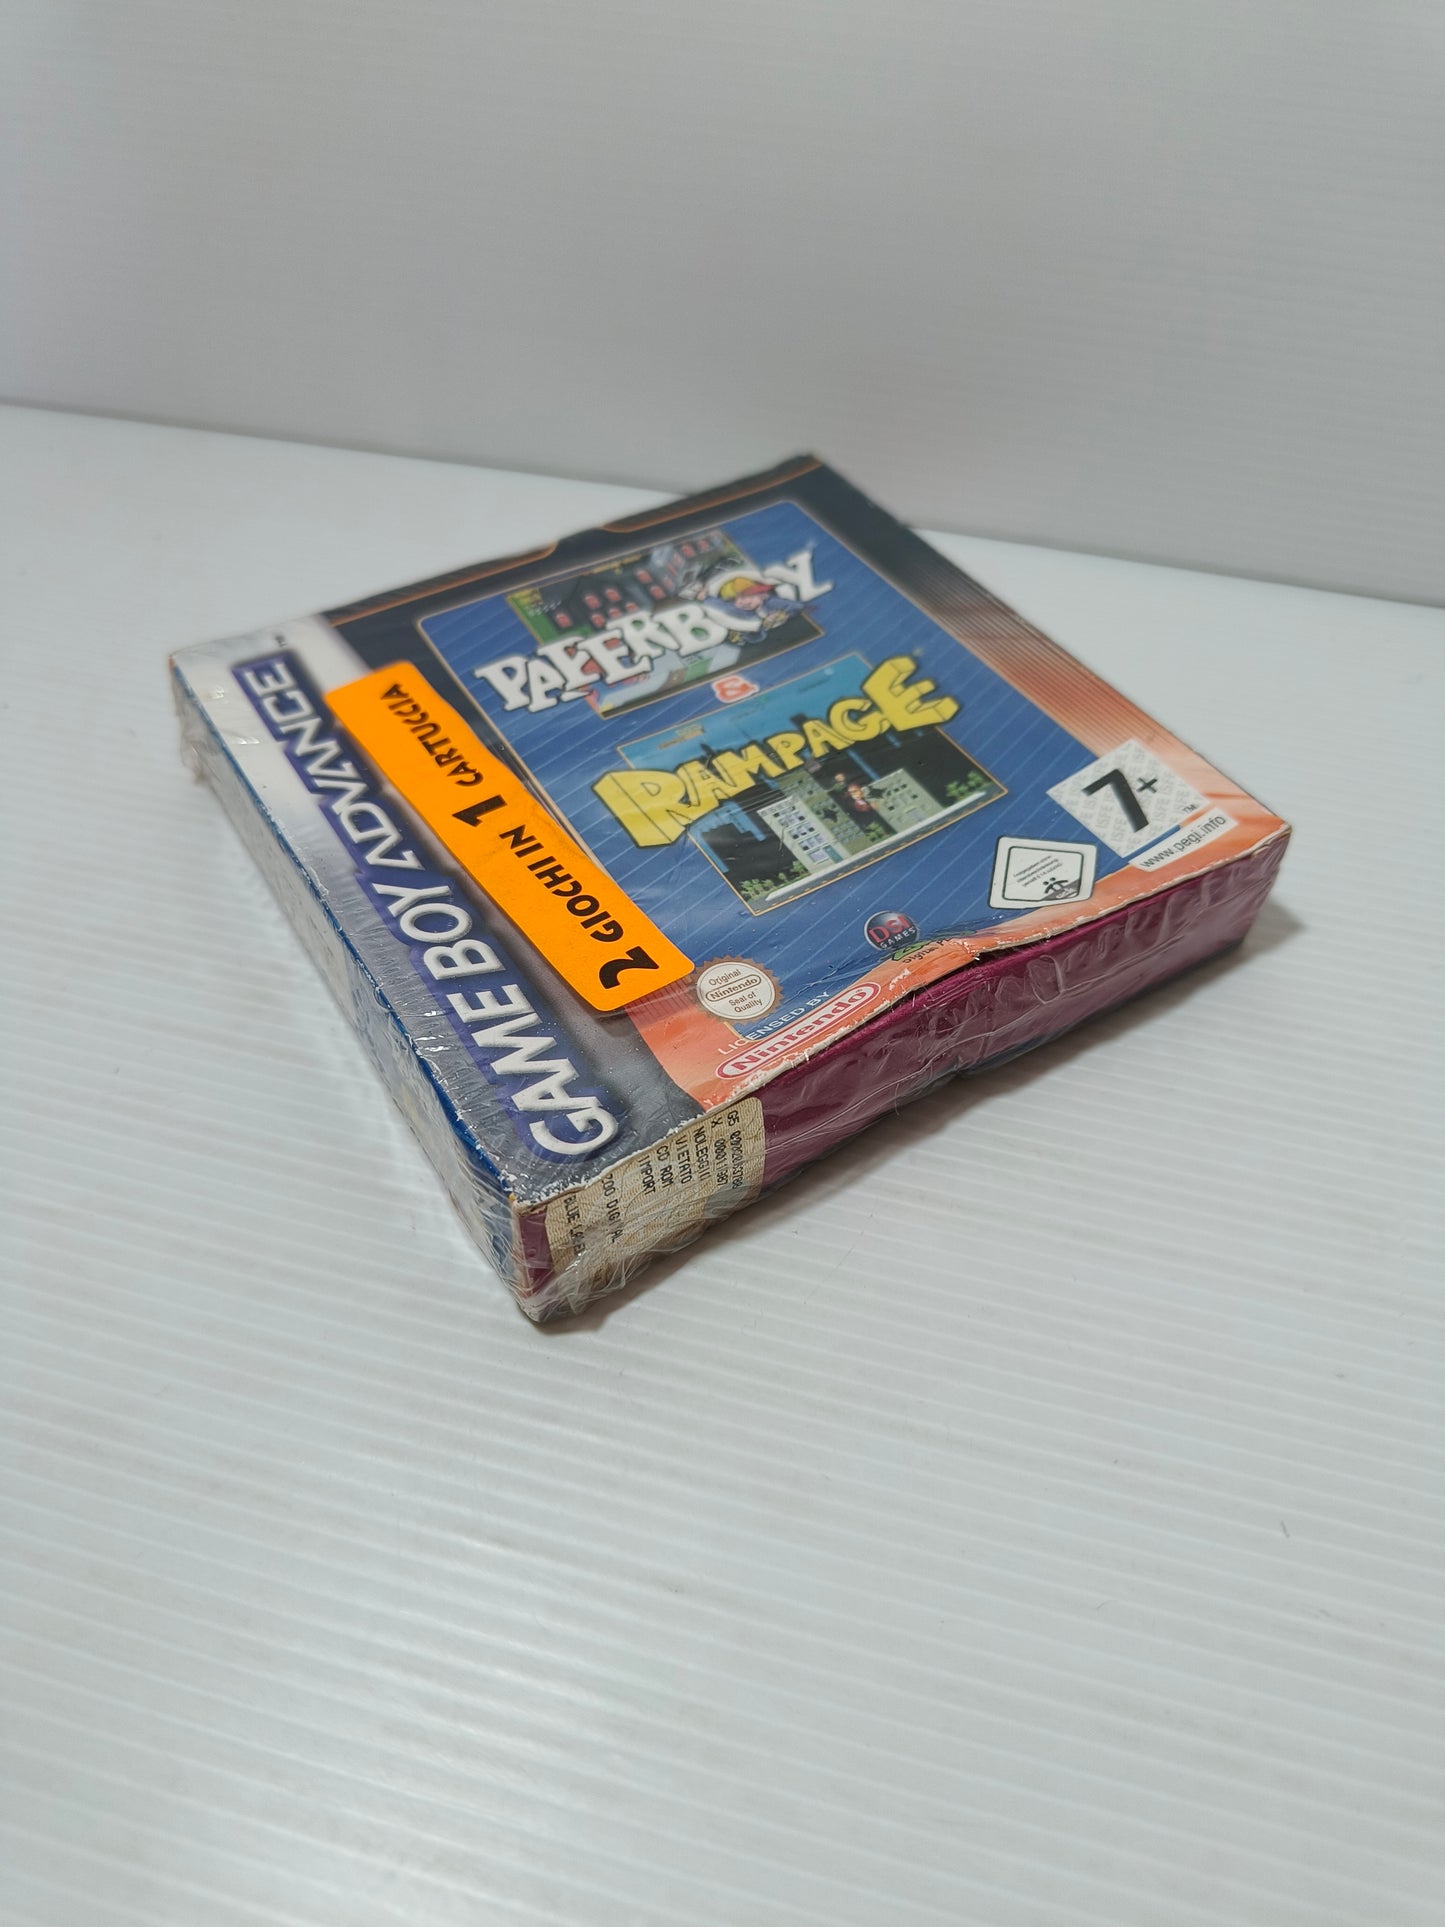 Paperboy and Rampage video game for Game Boy Advance